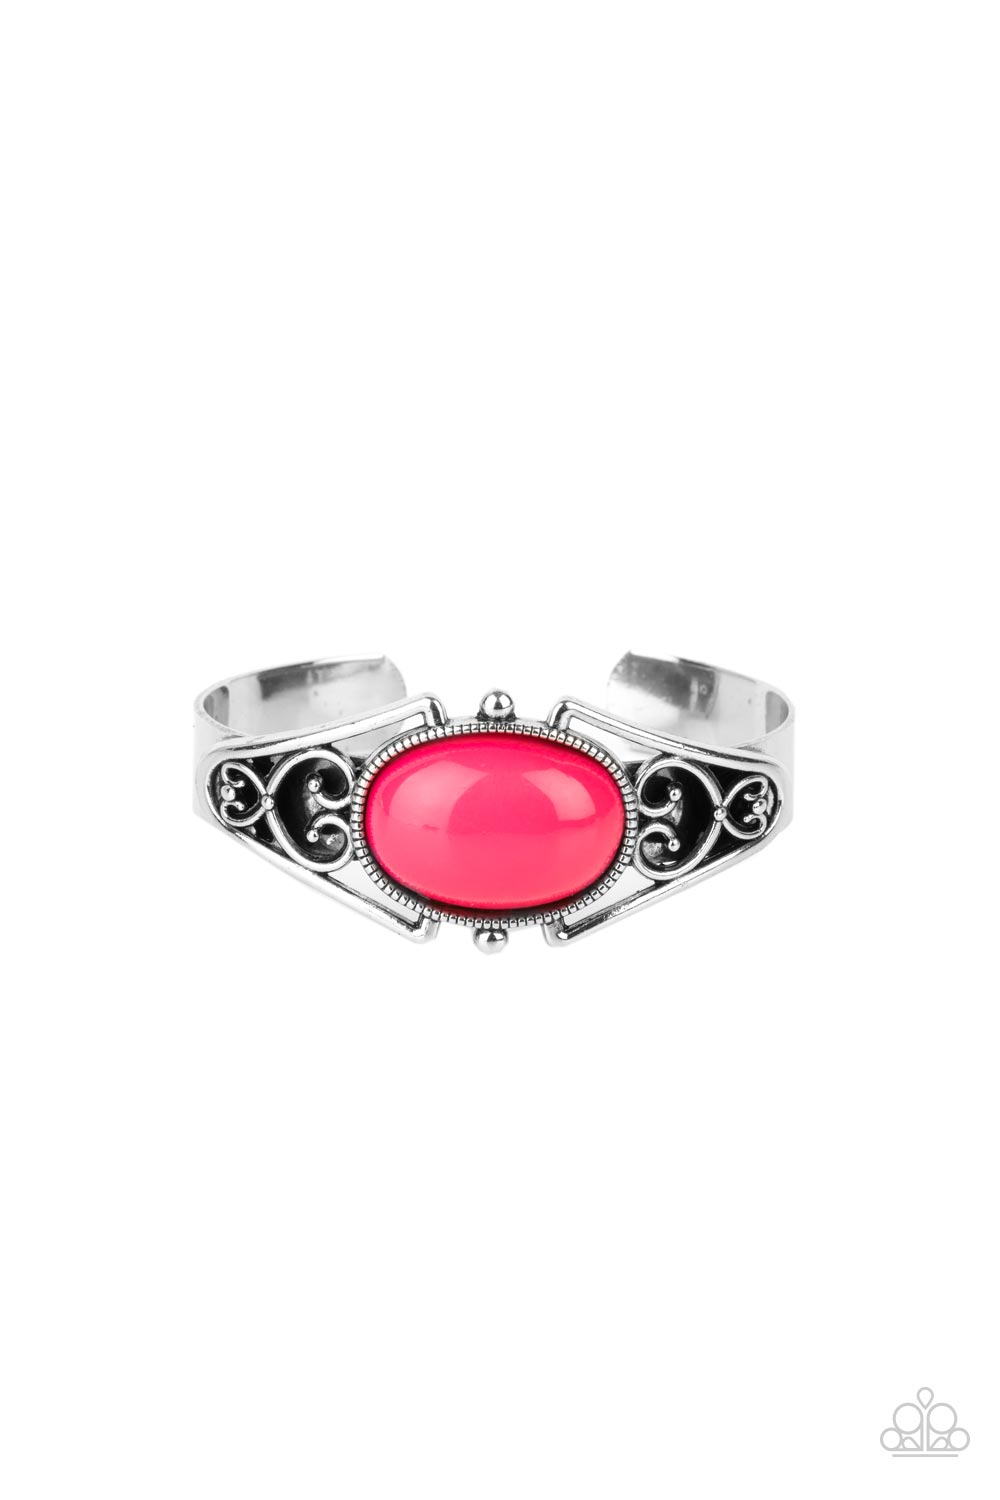 Springtime Trendsetter - Pink and Silver Bracelet - Paparazzi Accessories - A bubbly Raspberry Sorbet bead is nestled inside a silver filigree filled frame atop a dainty silver cuff, creating a whimsical centerpiece around the wrist. Sold as one individual bracelet.